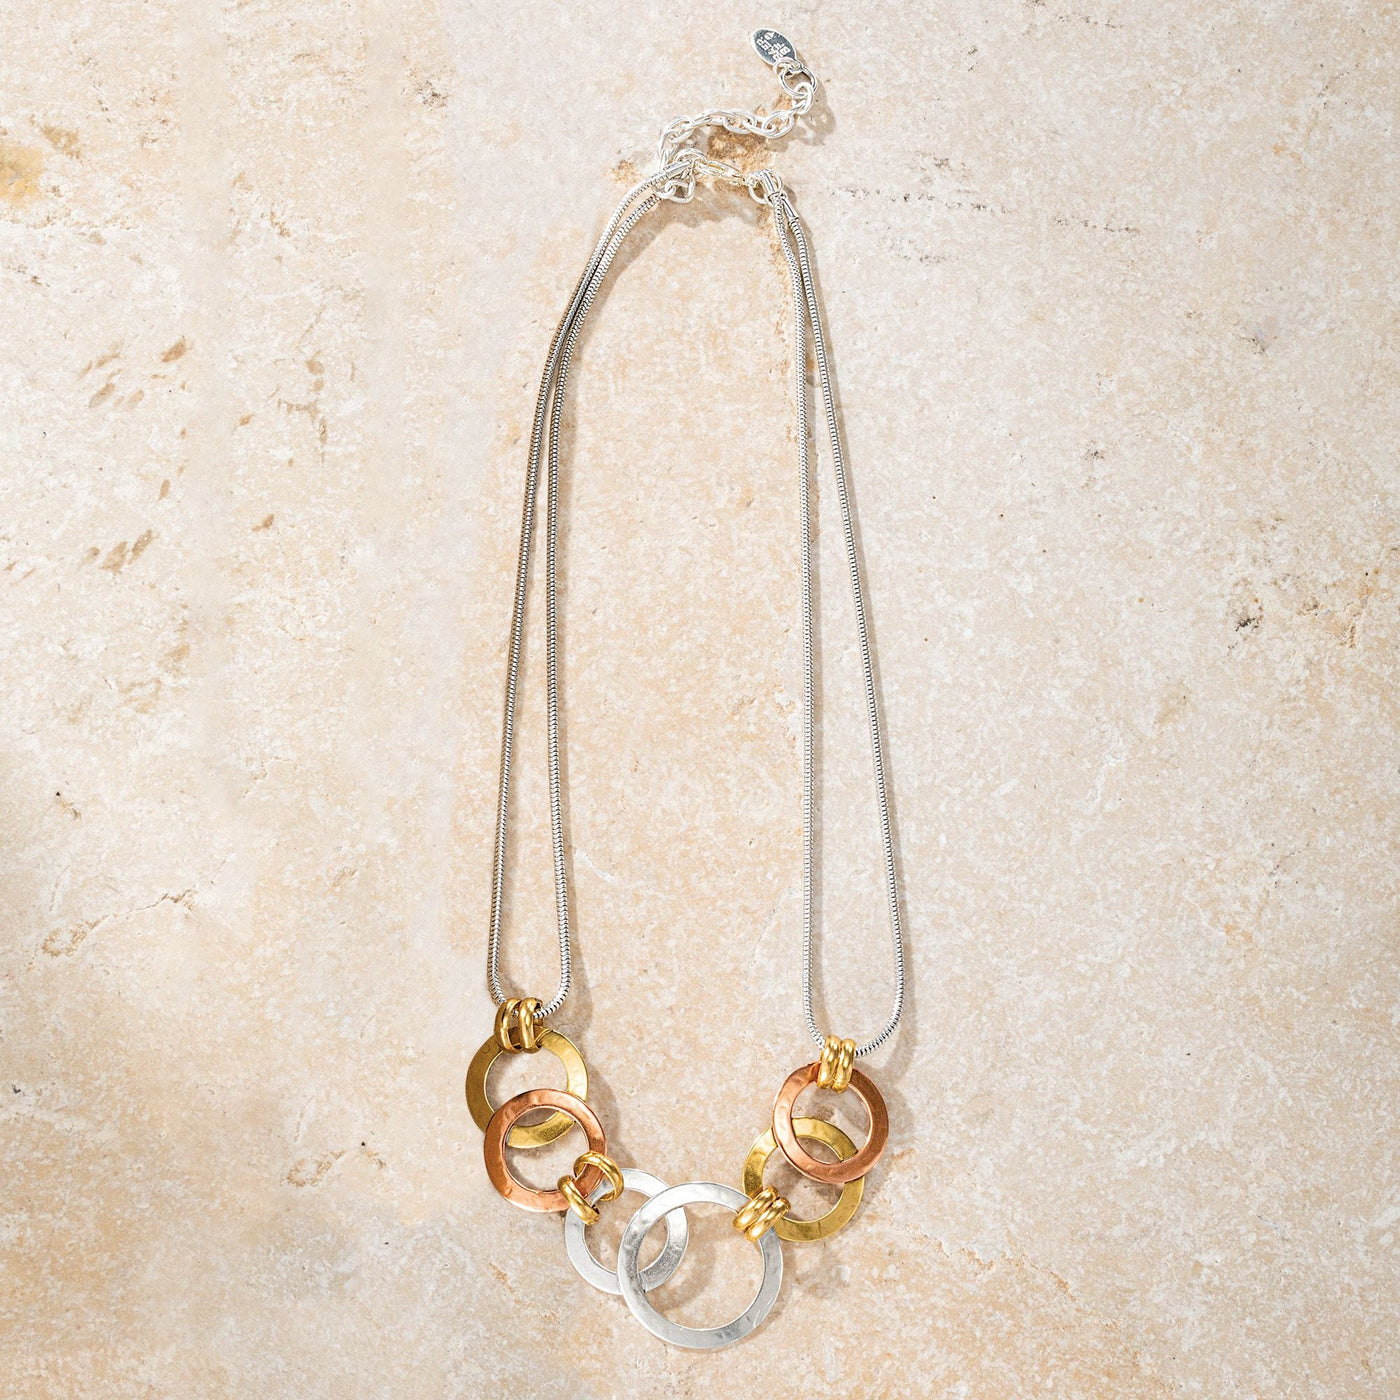 Marjorie's Mixed Metal Linked Rings Statement Necklace